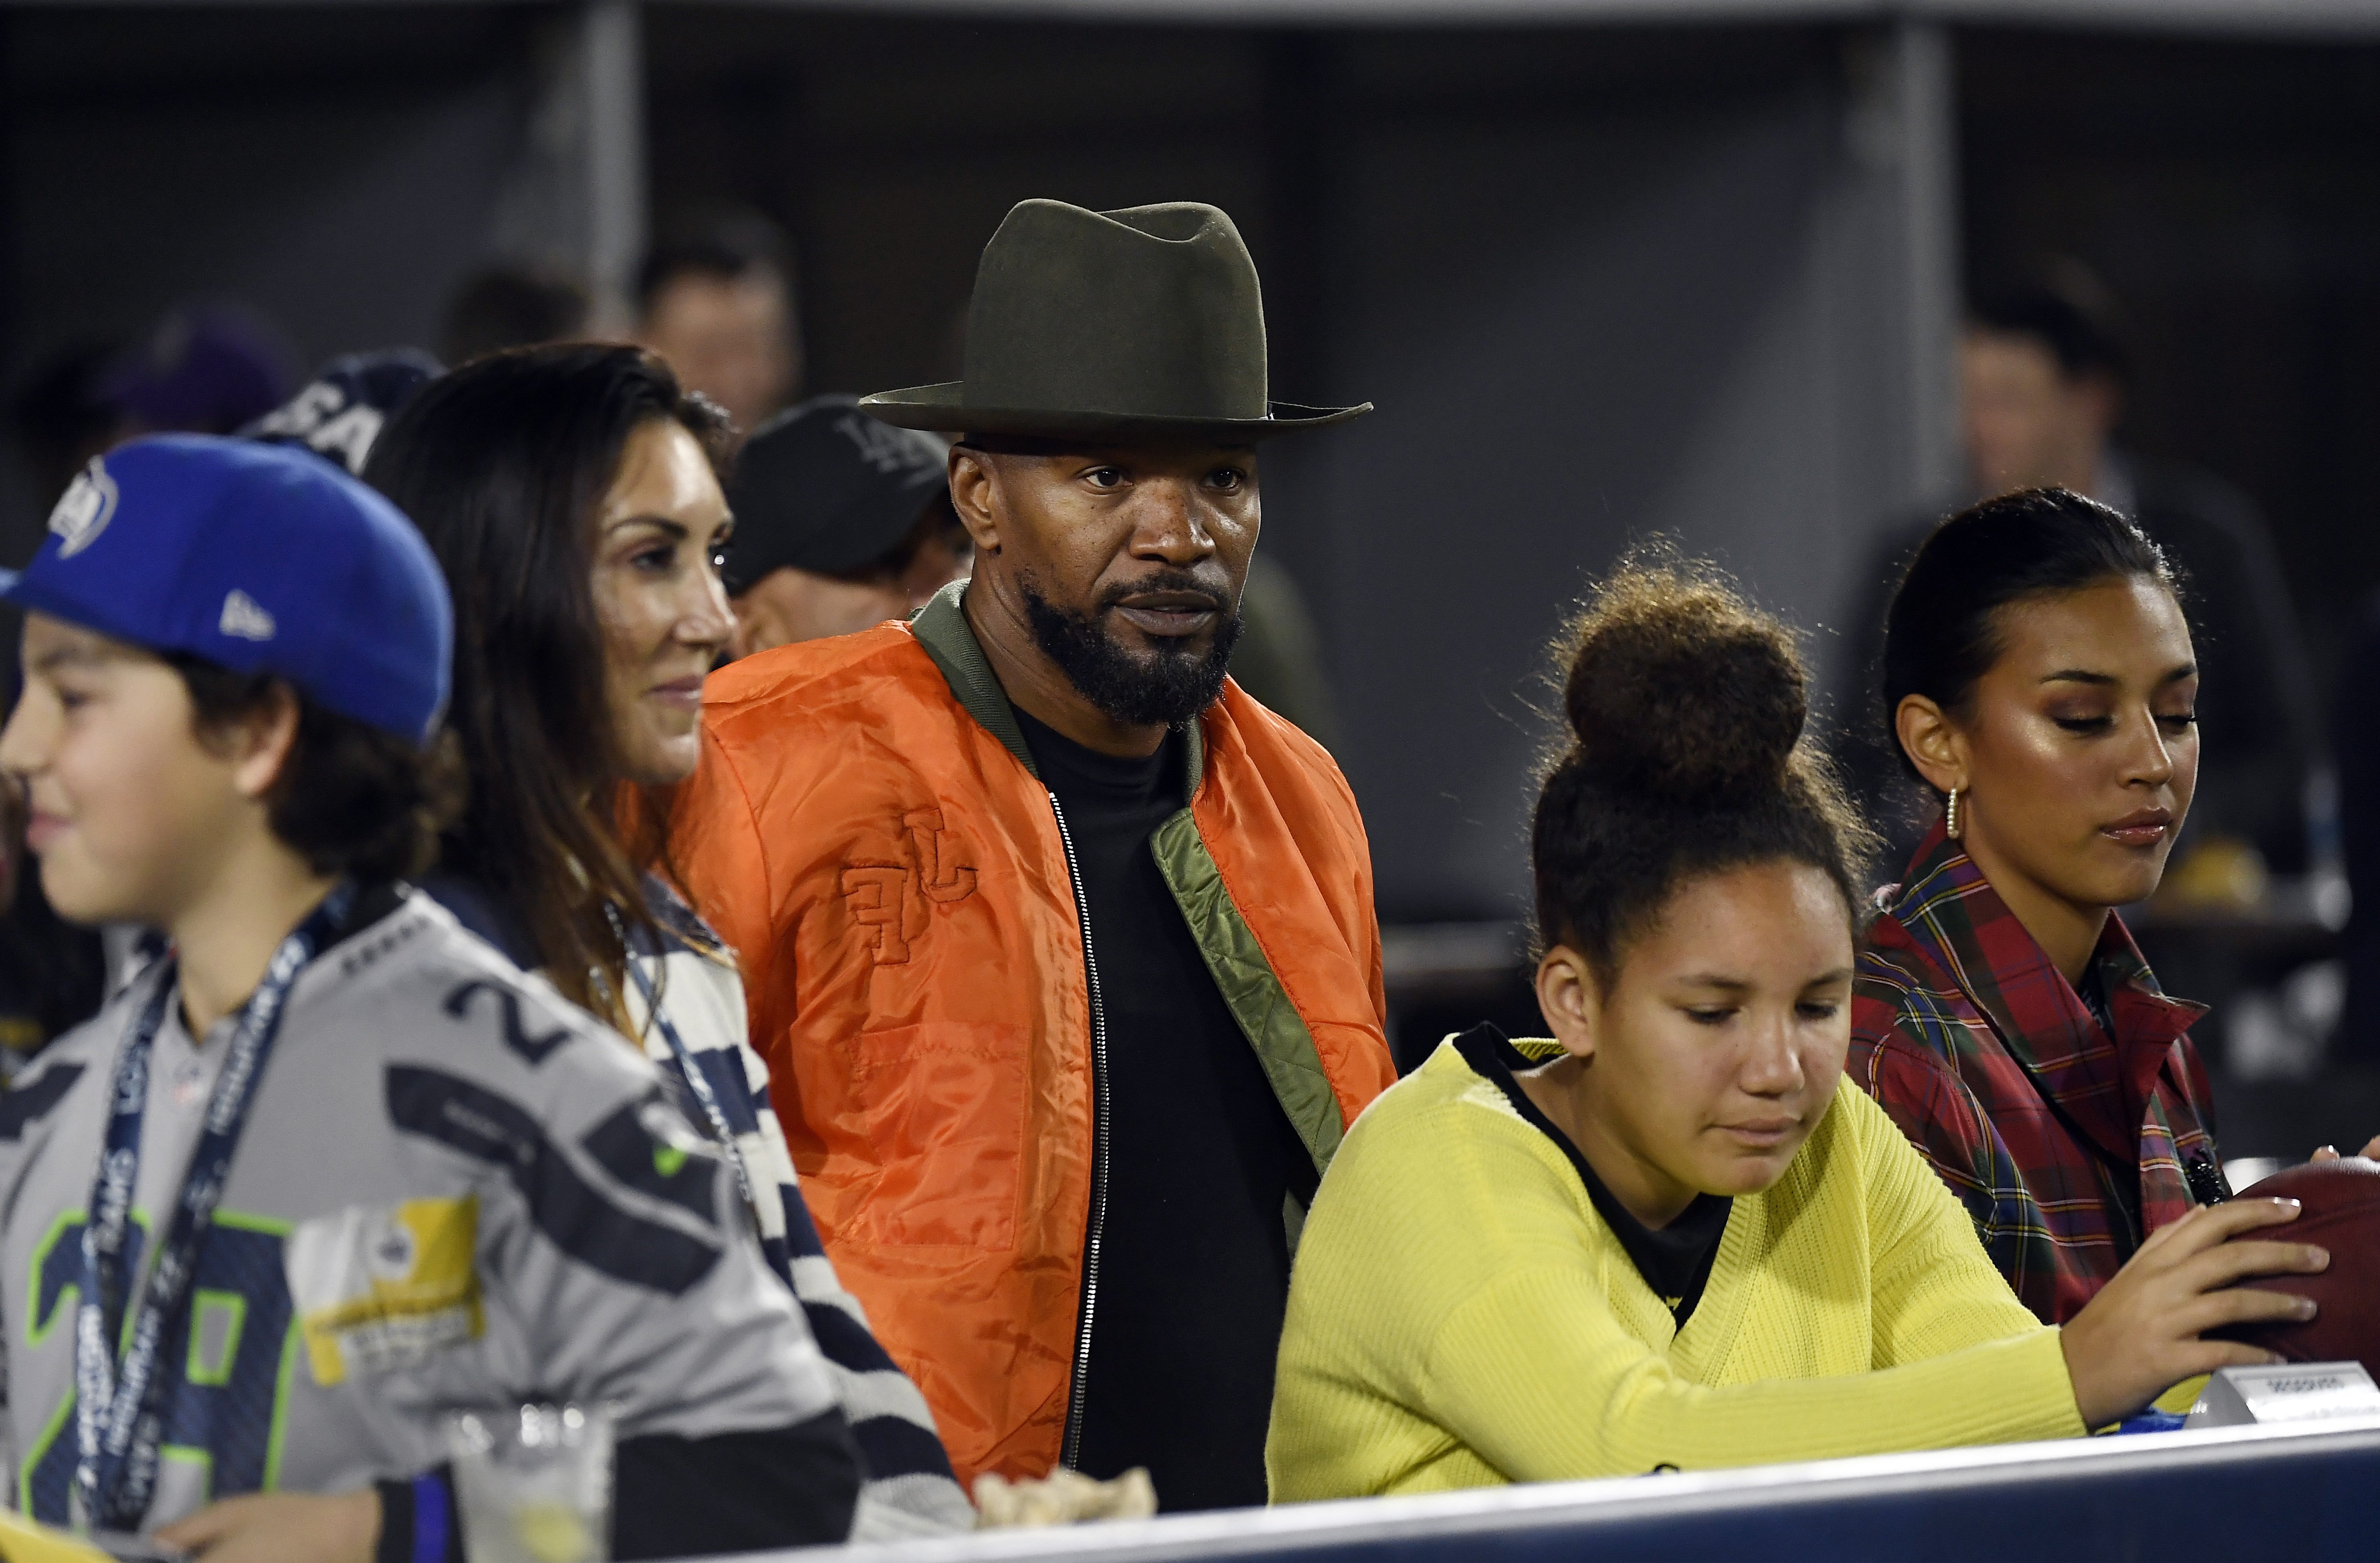 Jamie Foxx at the Seattle Seahawks & Los Angeles Rams football game with his family on Dec. 8, 2019 in California | Photo: Getty Images